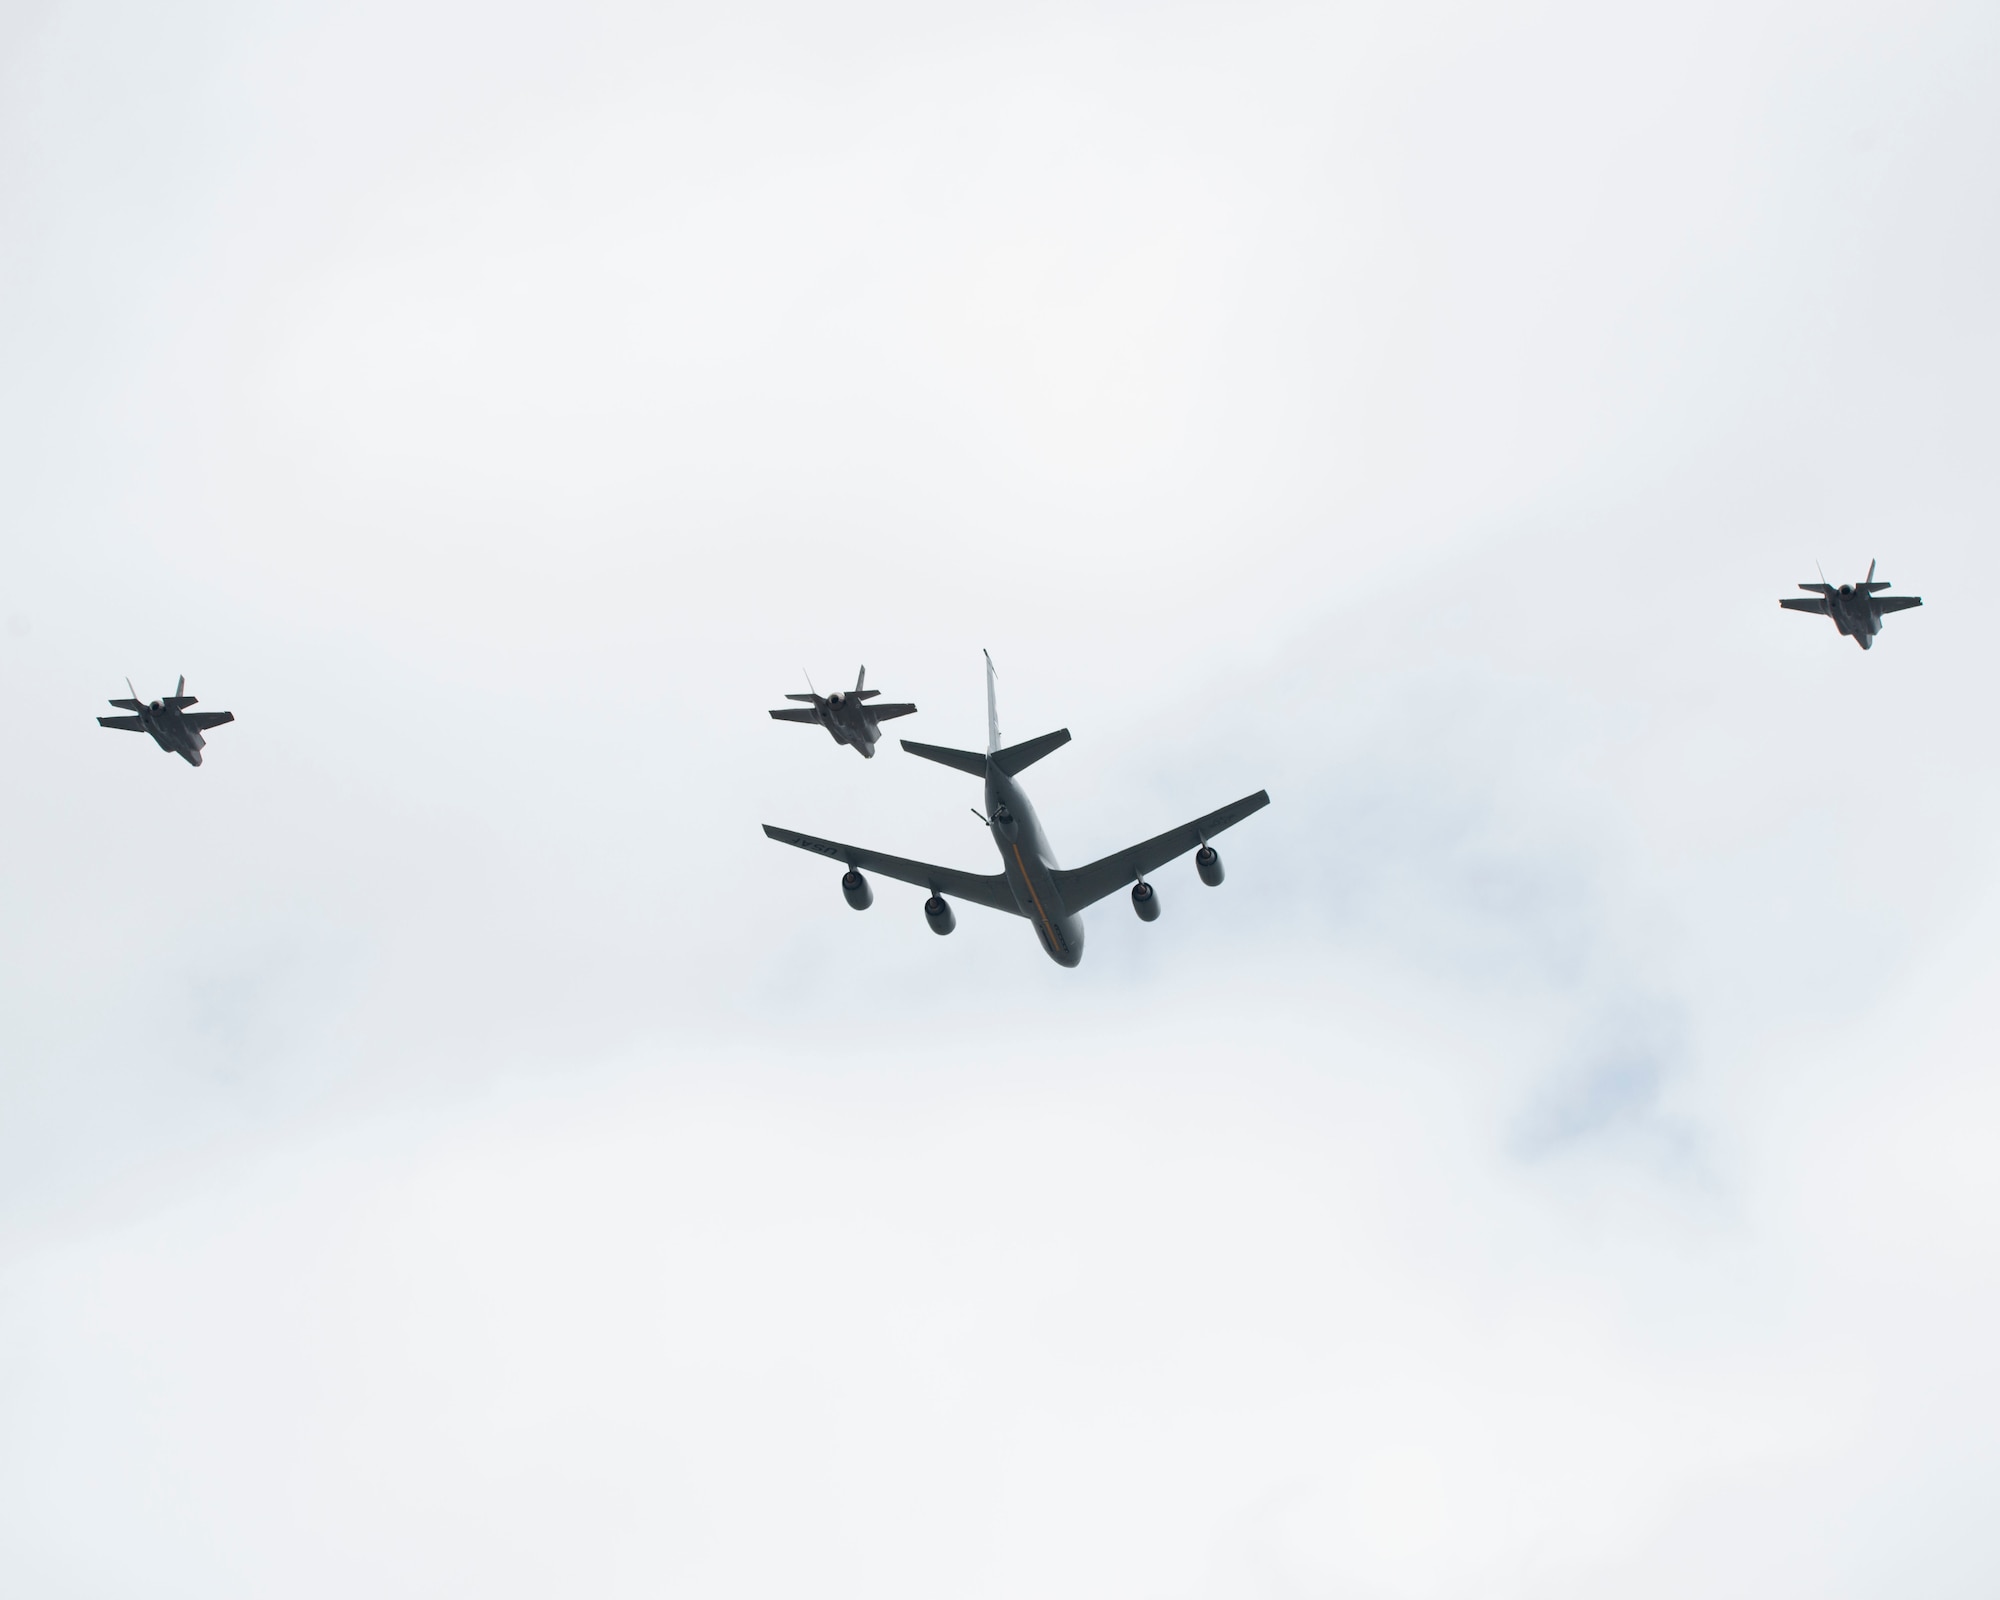 Members assigned to the 158th Fighter Wing, from the Vermont Air National Guard Base, Vt. and 914th Air Refueling Wing, from Niagara Air Reserve Station, Niagara Falls, N.Y. fly over the city of Buffalo, N.Y. on May 12, 2020.  The flyover was part of a Salute WNY exercise to show appreciation for healthcare workers, first responders and essential employees. (U.S. Air National Guard photo by Airman 1st Class Michael Janker)